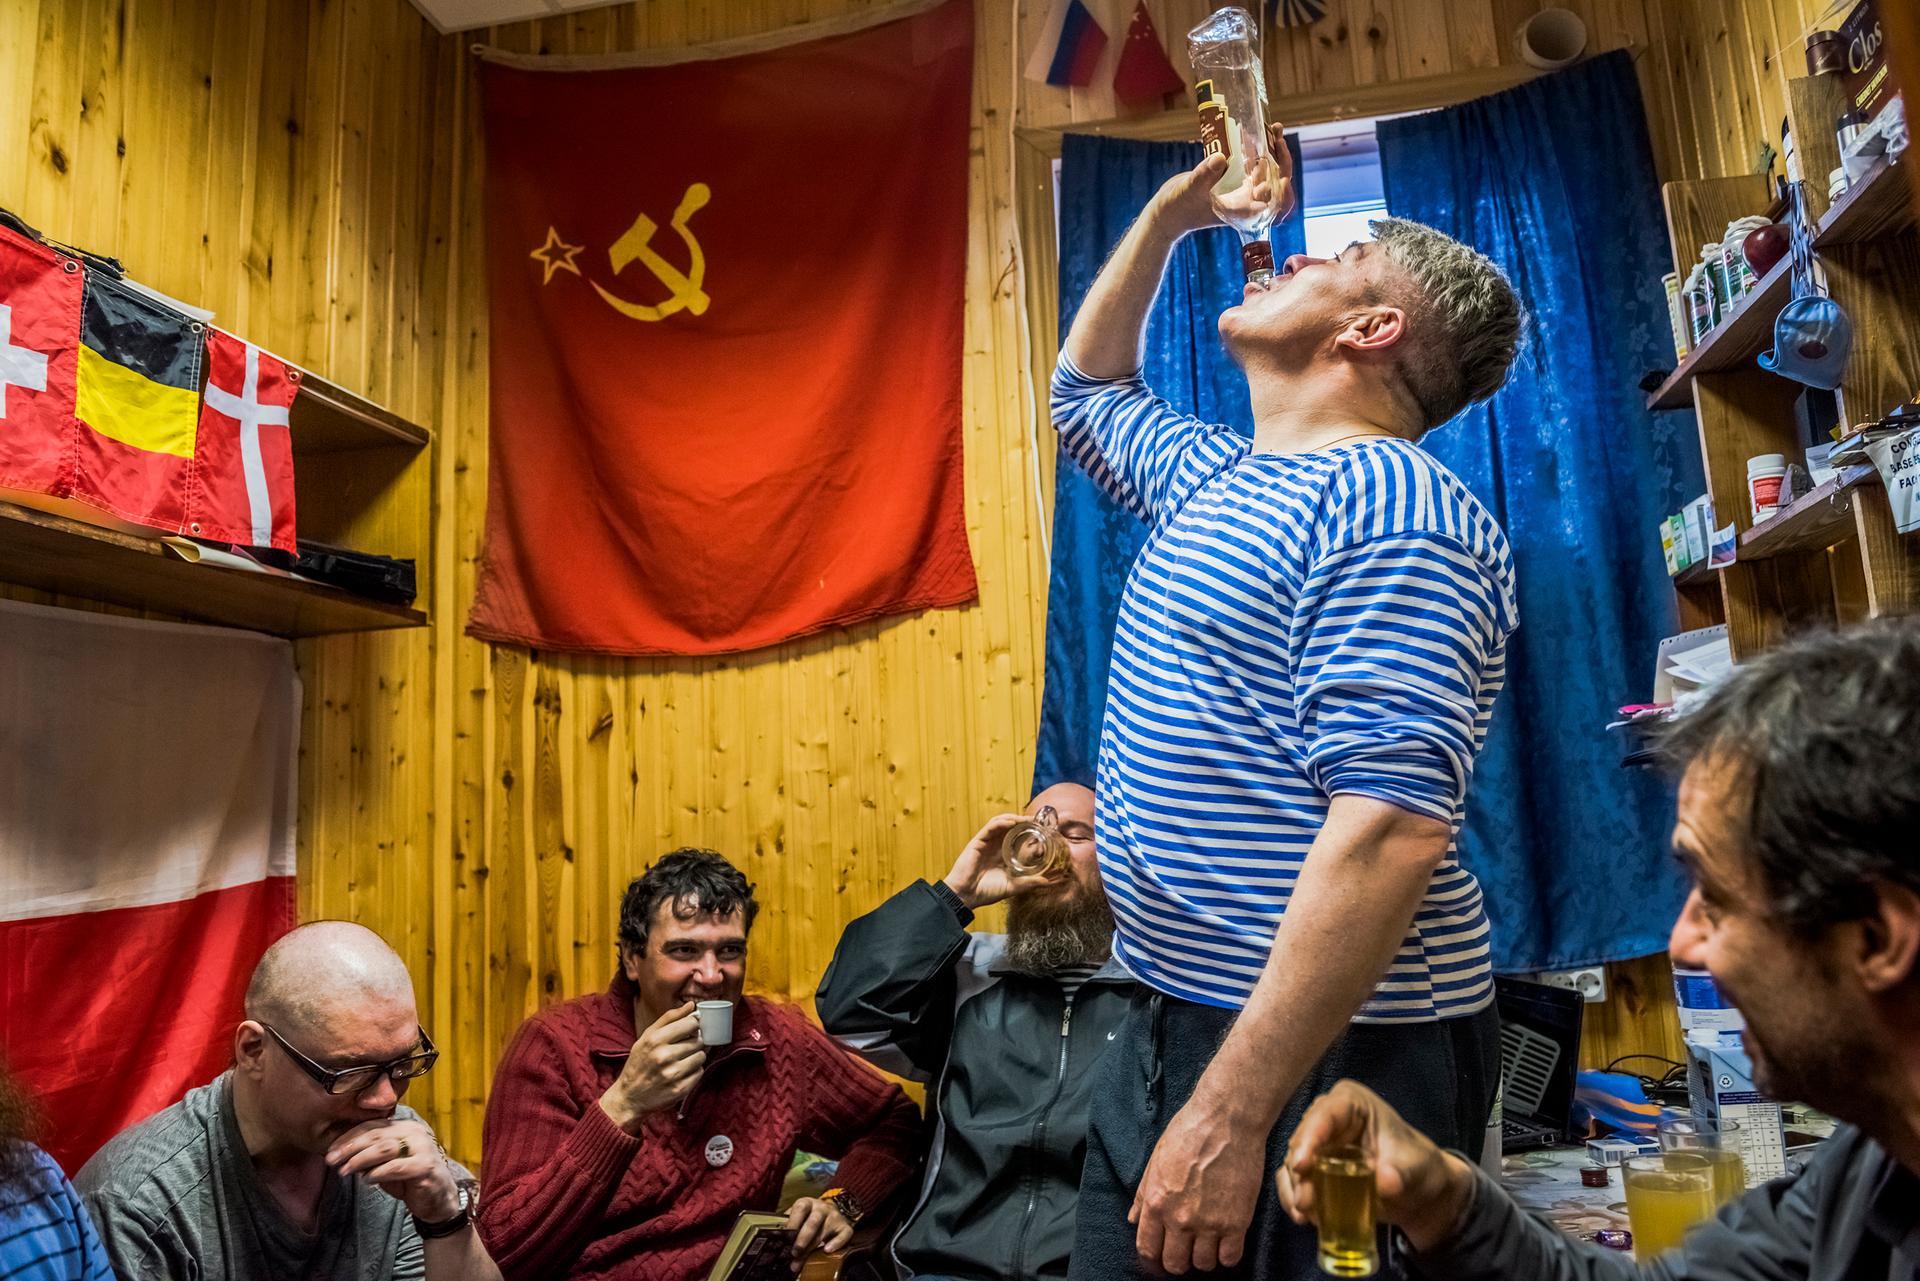 The winter expedition crew of Russian research team and a Chilean scientist drink Samagon, a homemade vodka, in a bedroom of the Bellingshausen Antarctica base; Fildes Bay, Antartica, 28 November 2015.